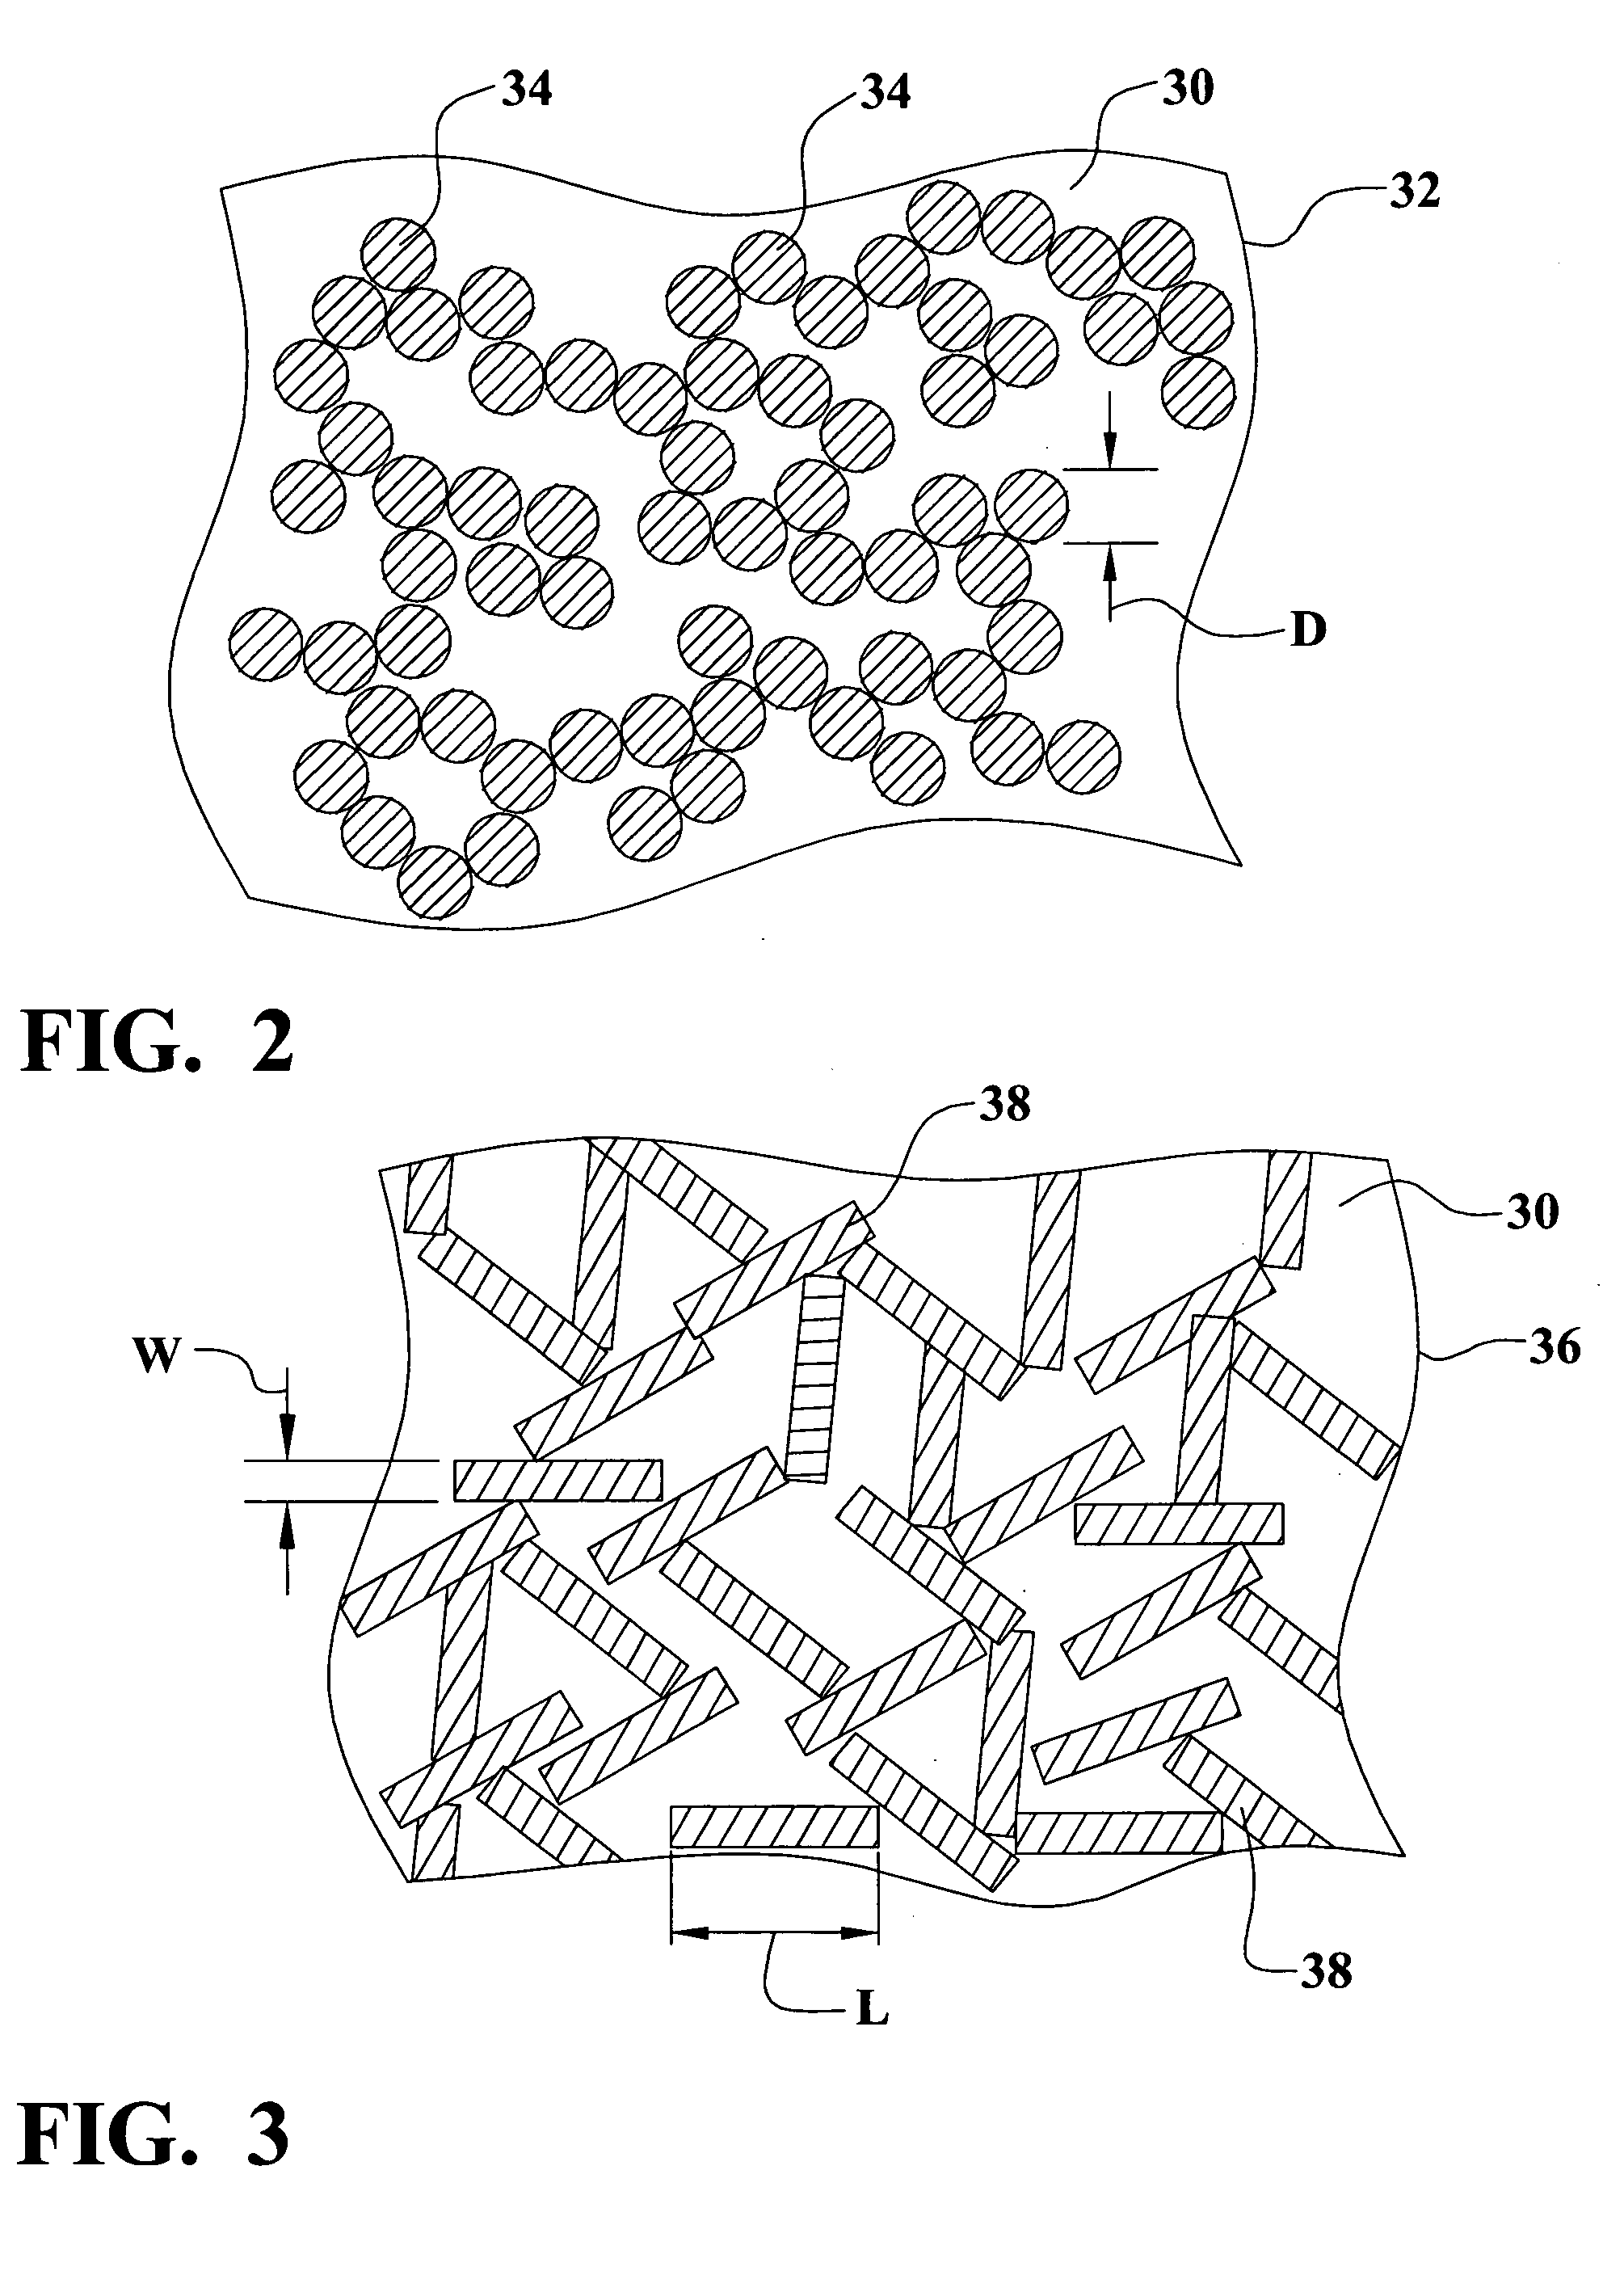 Vehicle body, chassis, and braking systems manufactured from conductive loaded resin-based materials